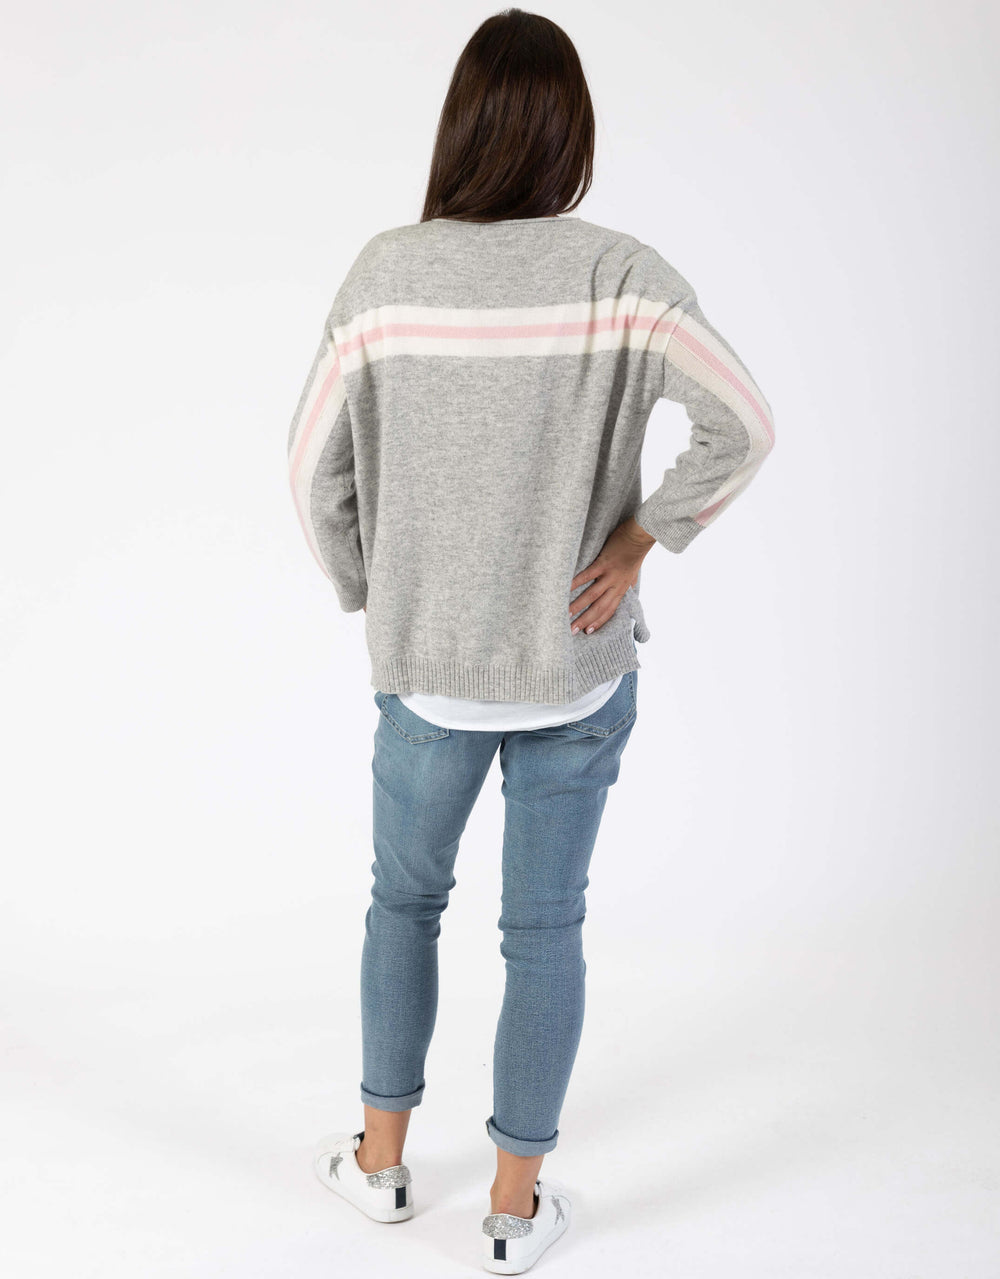 white-co-east-village-wool-knit-grey-marle-womens-clothing